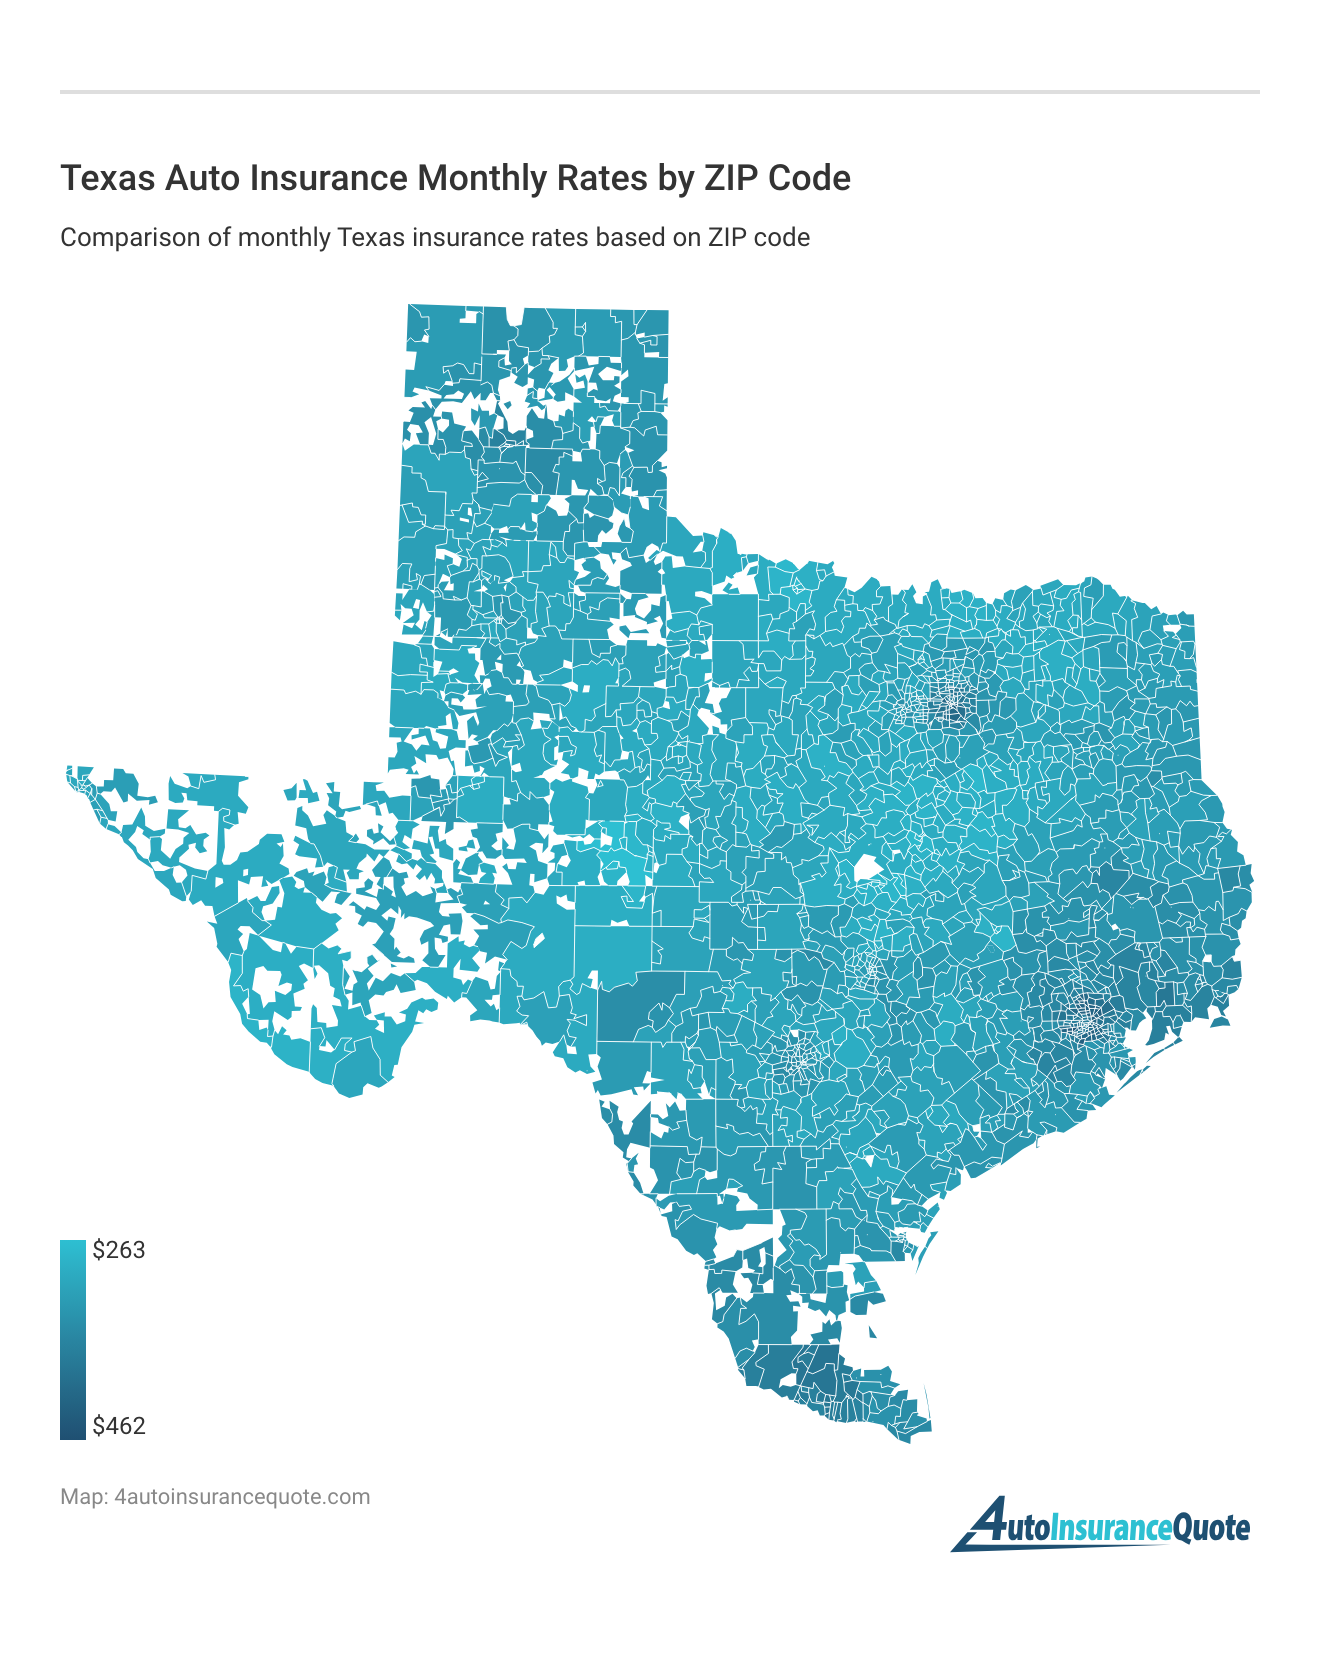 <h3>Texas Auto Insurance Monthly Rates by ZIP Code</h3>